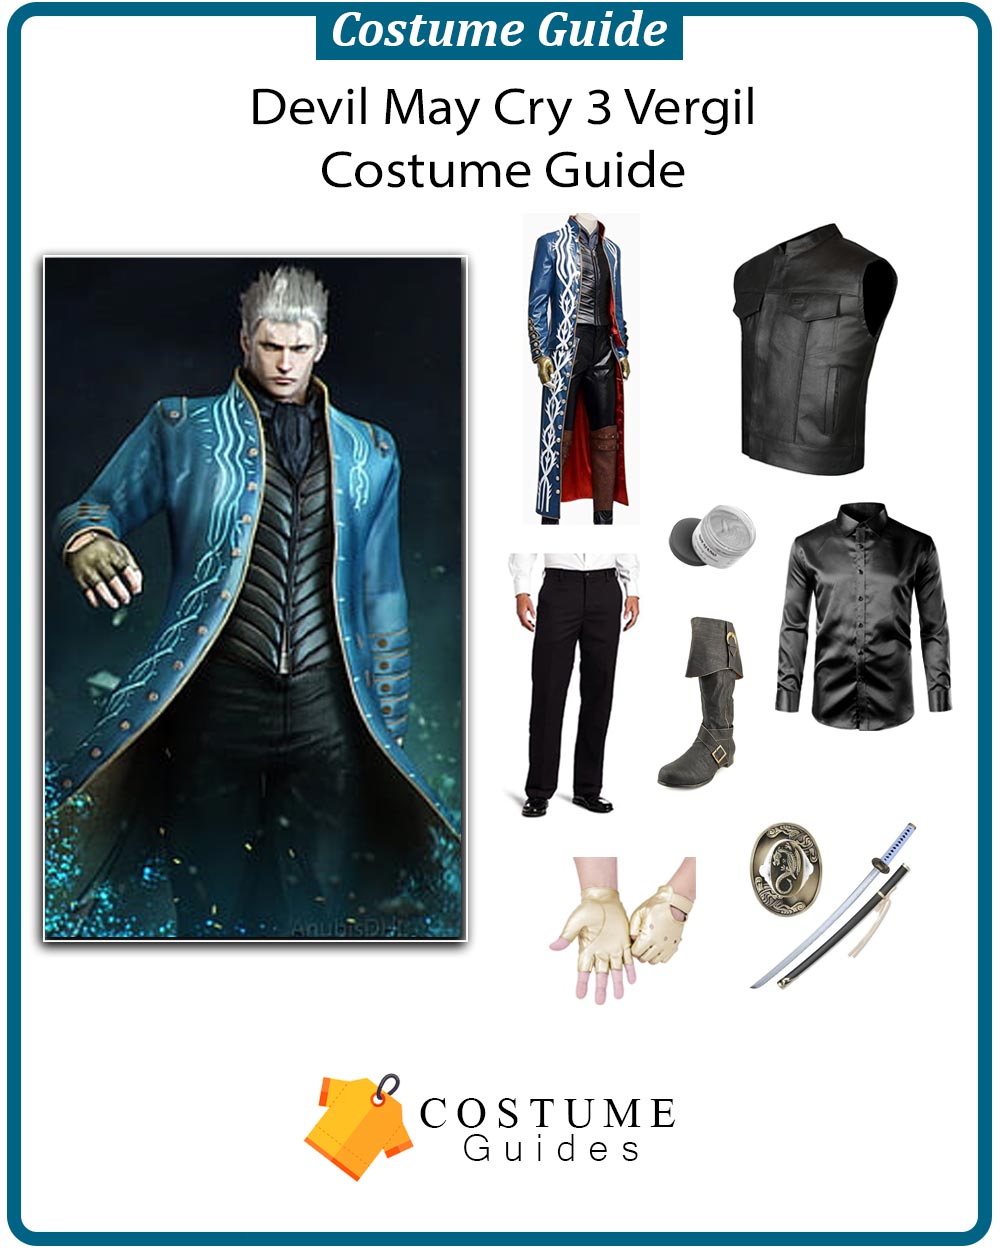 Devil May Cry 3 Vergil Costume